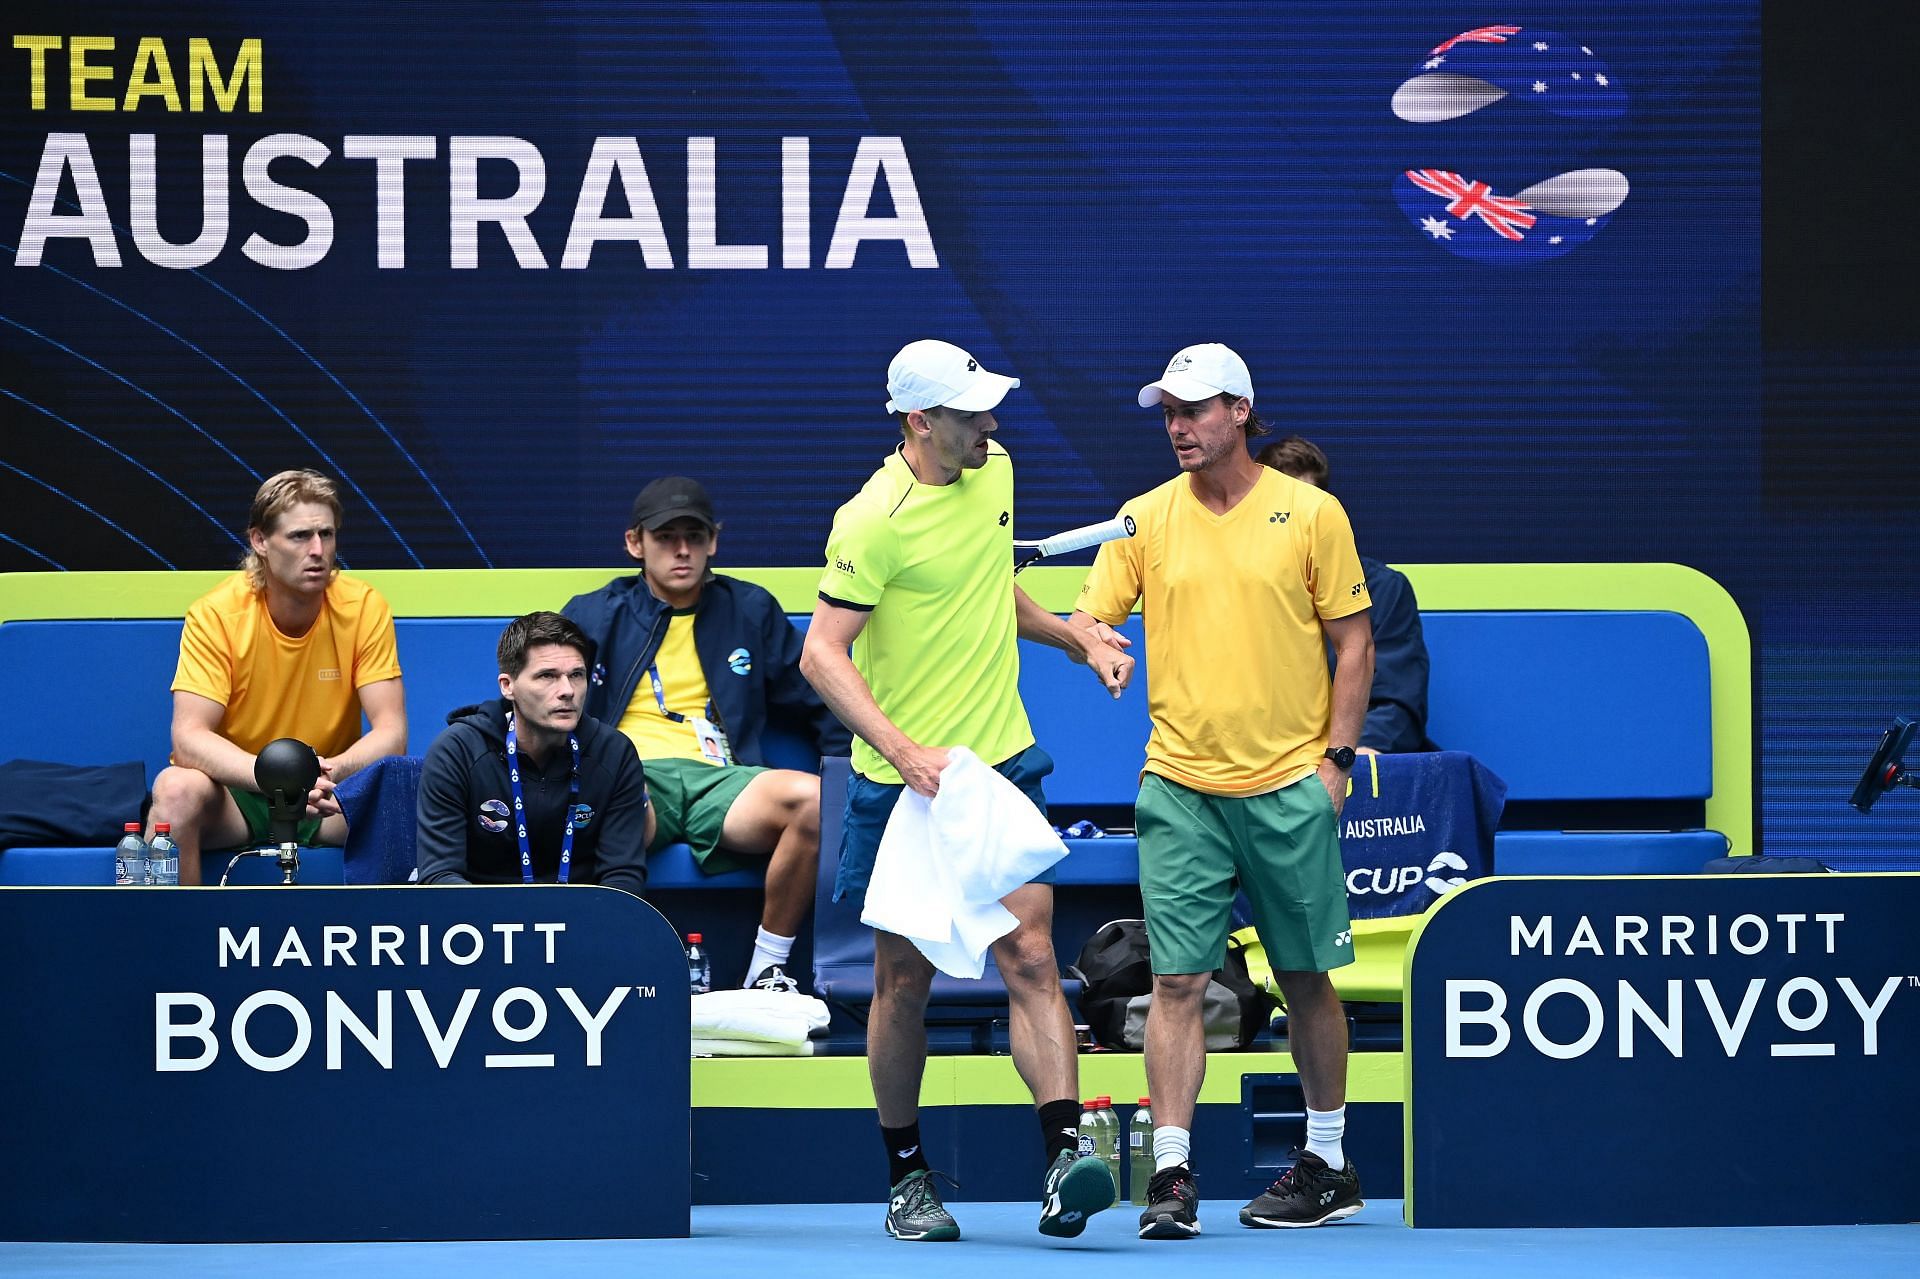 Hosts Australia will play their first match of the ATP Cup on January 2